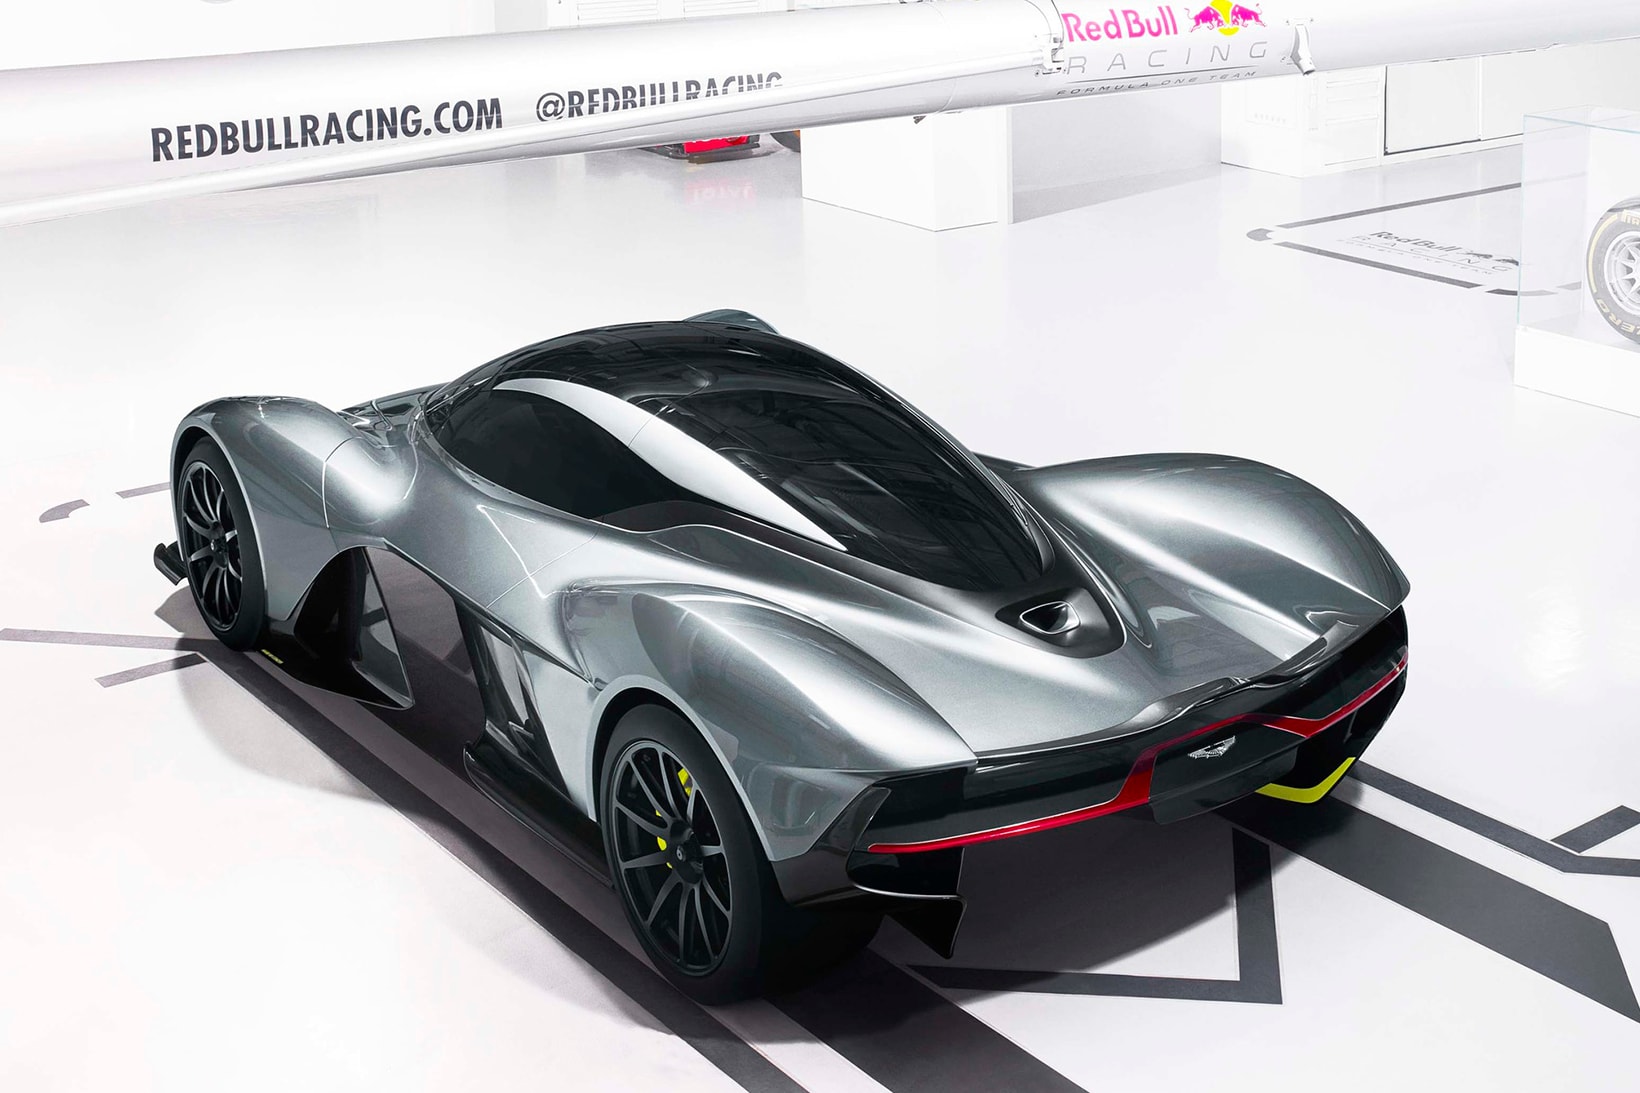 Aston Martin Red Bull Racing AM-RB 001 pictures in garage